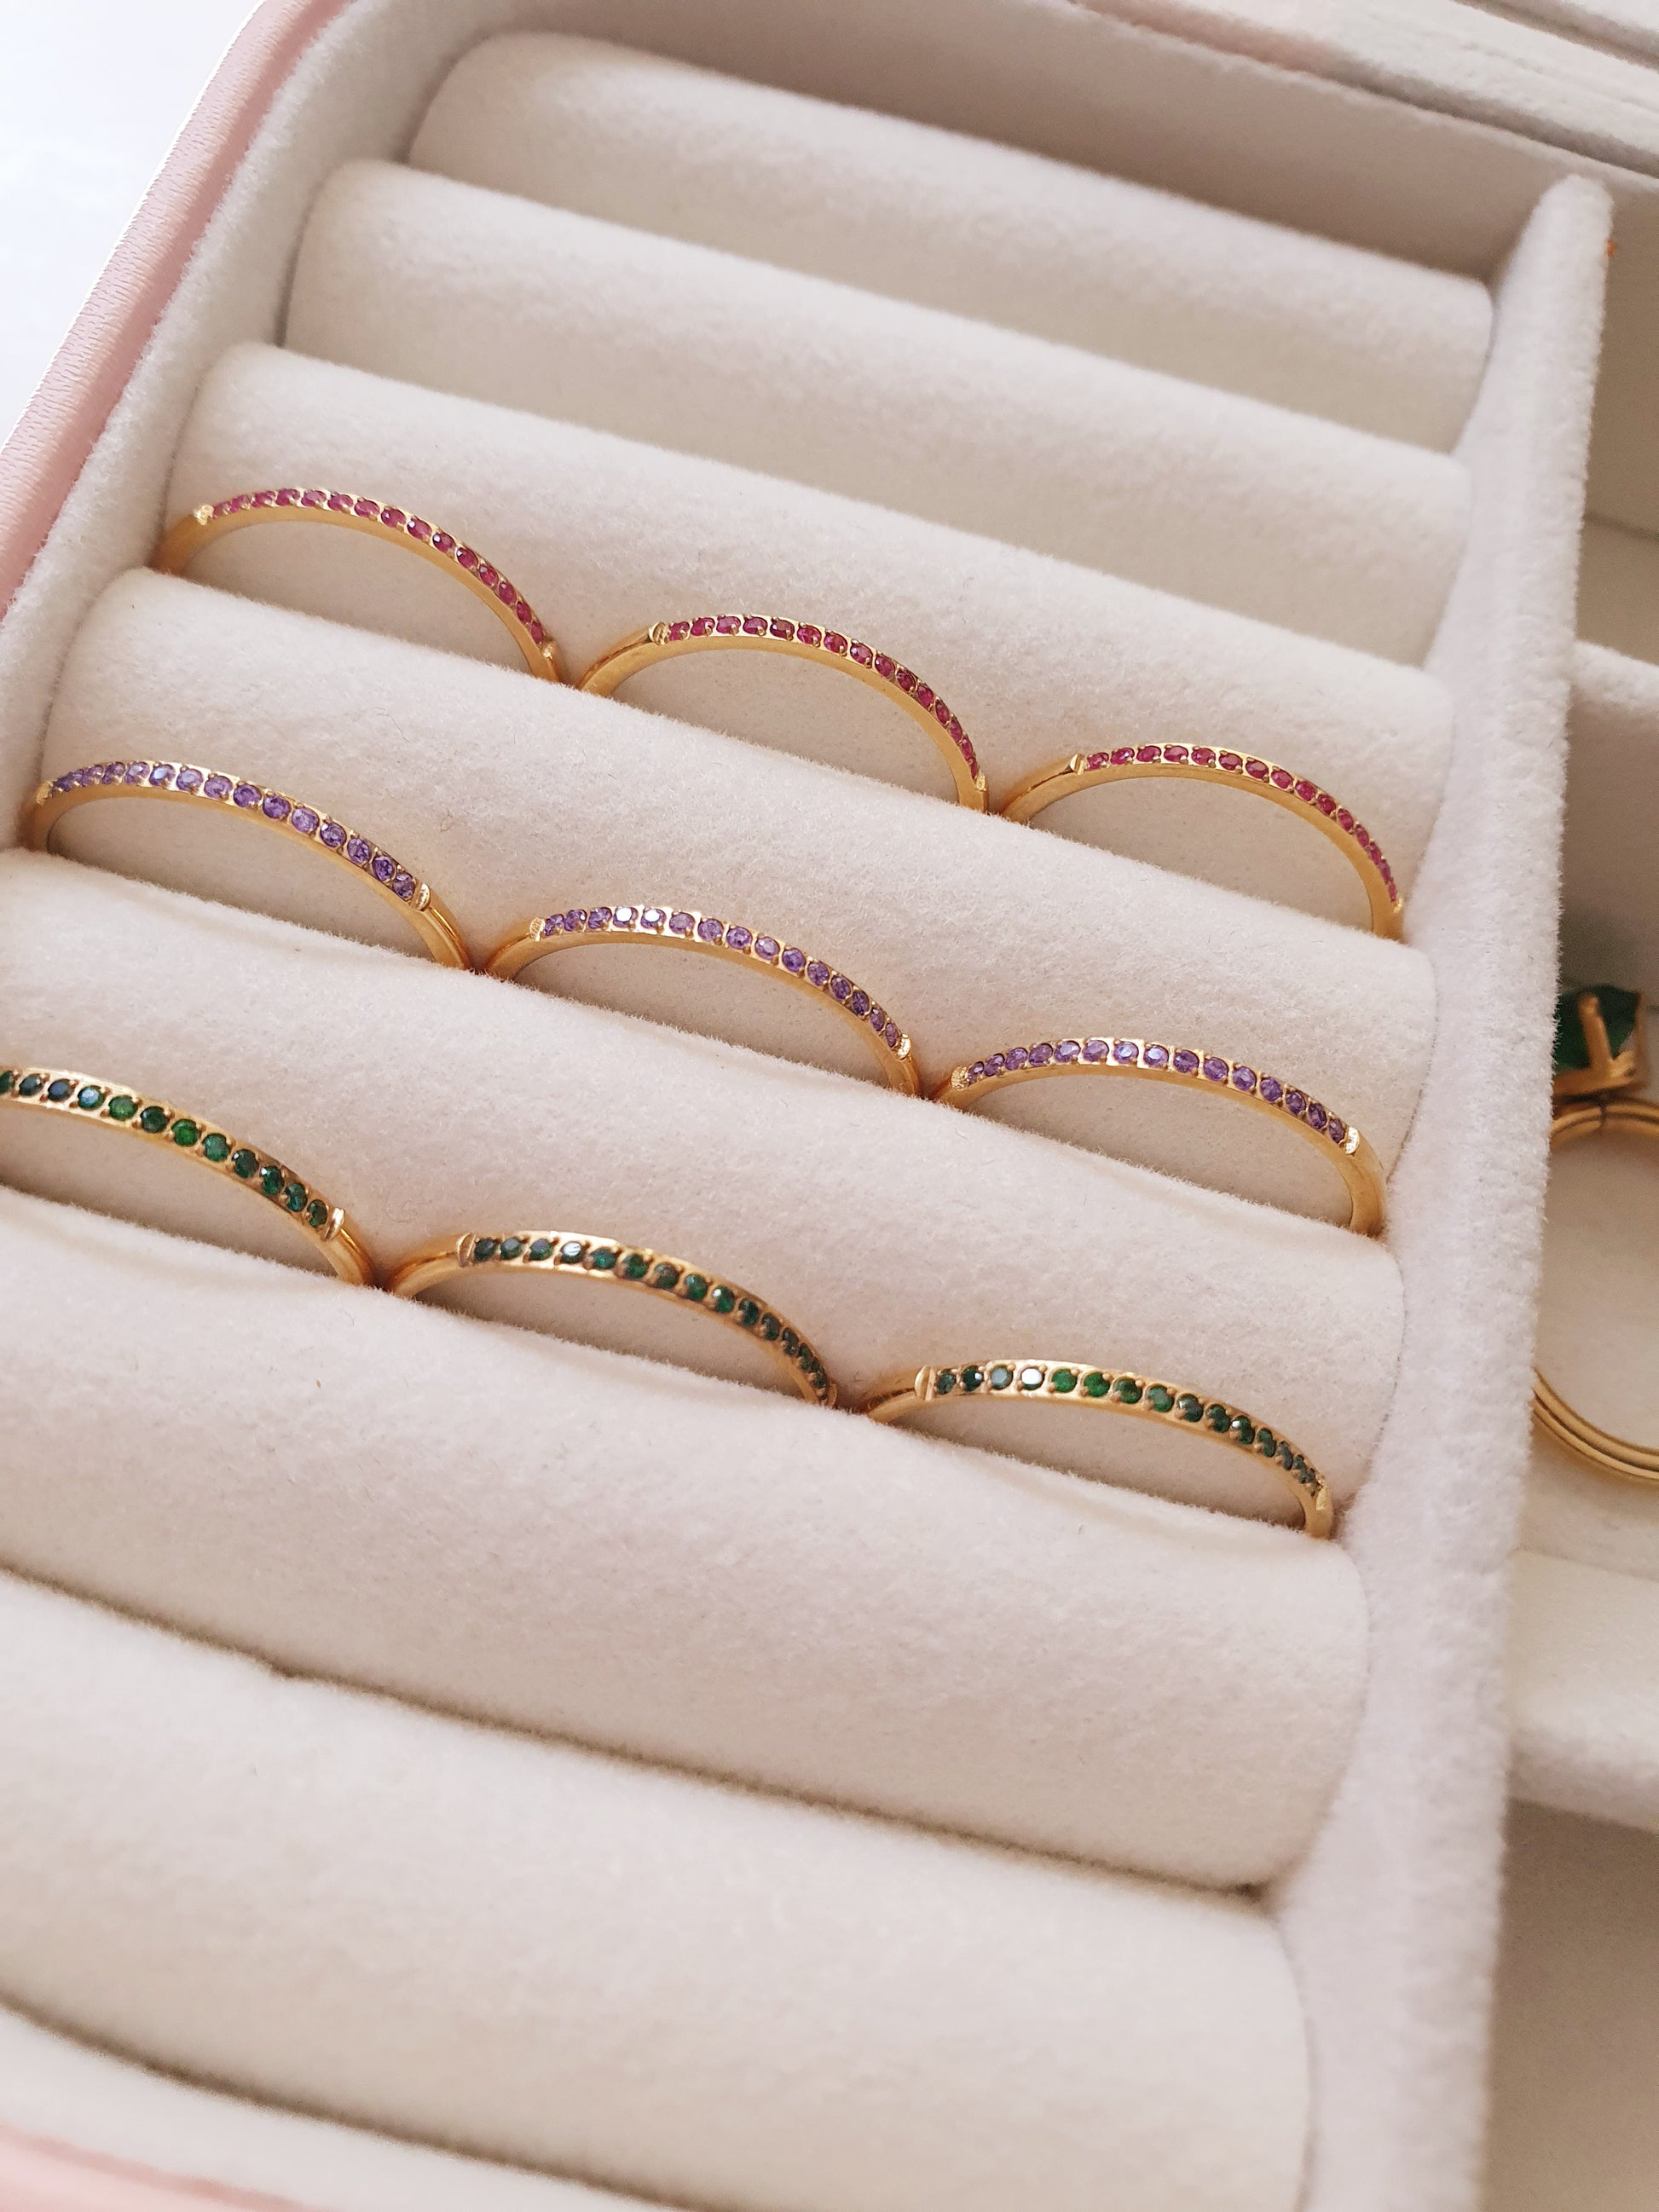 A jewellery box holds nine gold rings partially set with either green, purple or pink stones